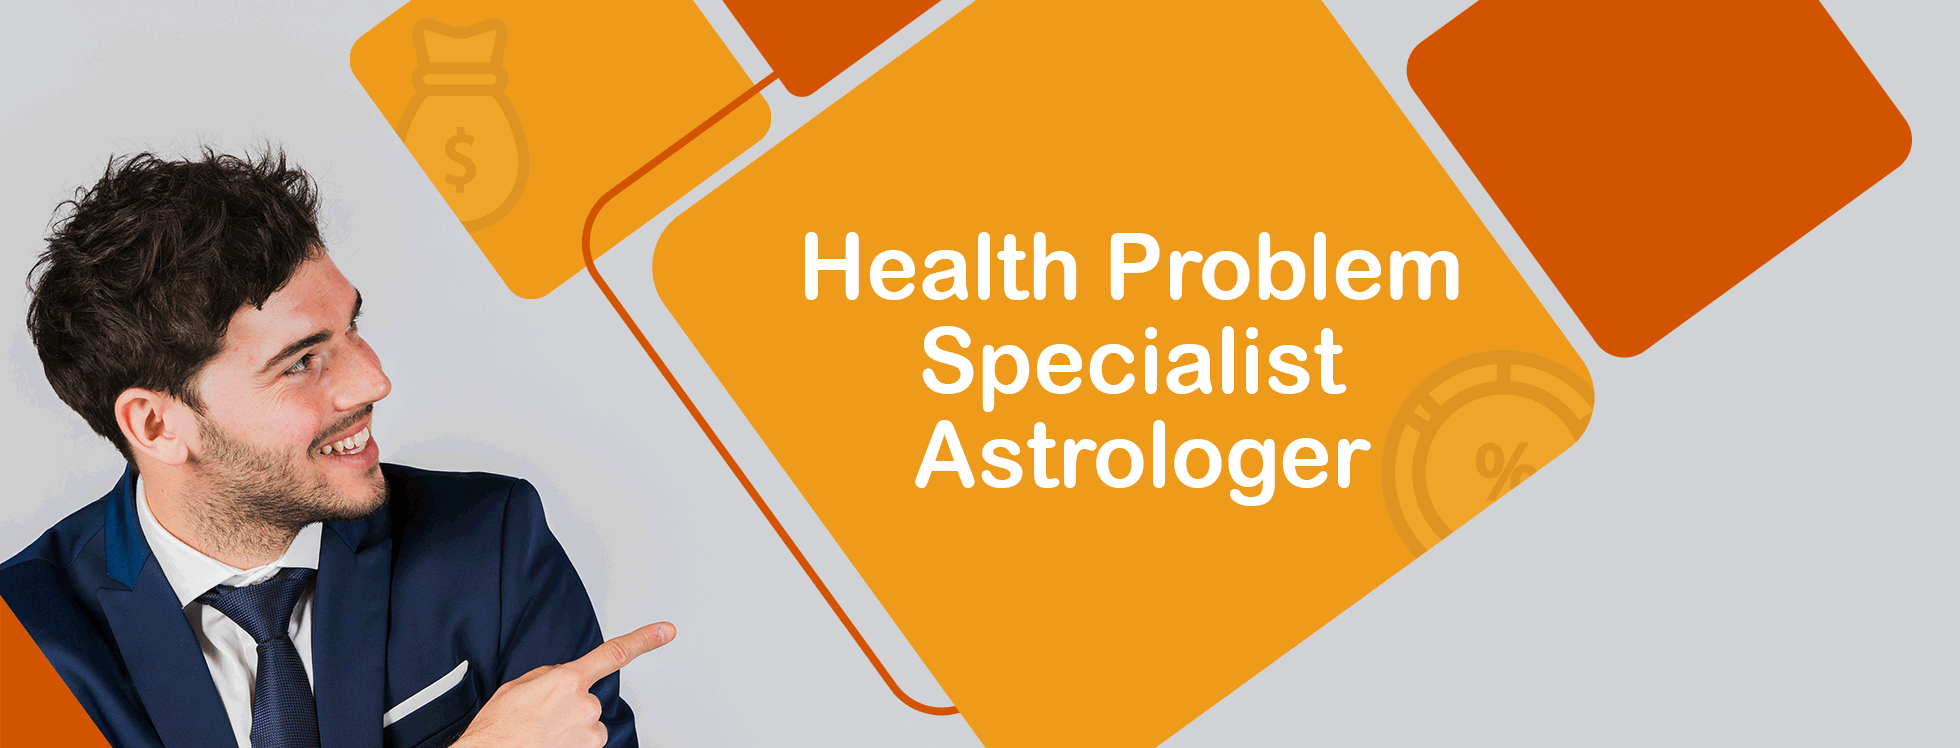 health problem specialist astrologer in canberra